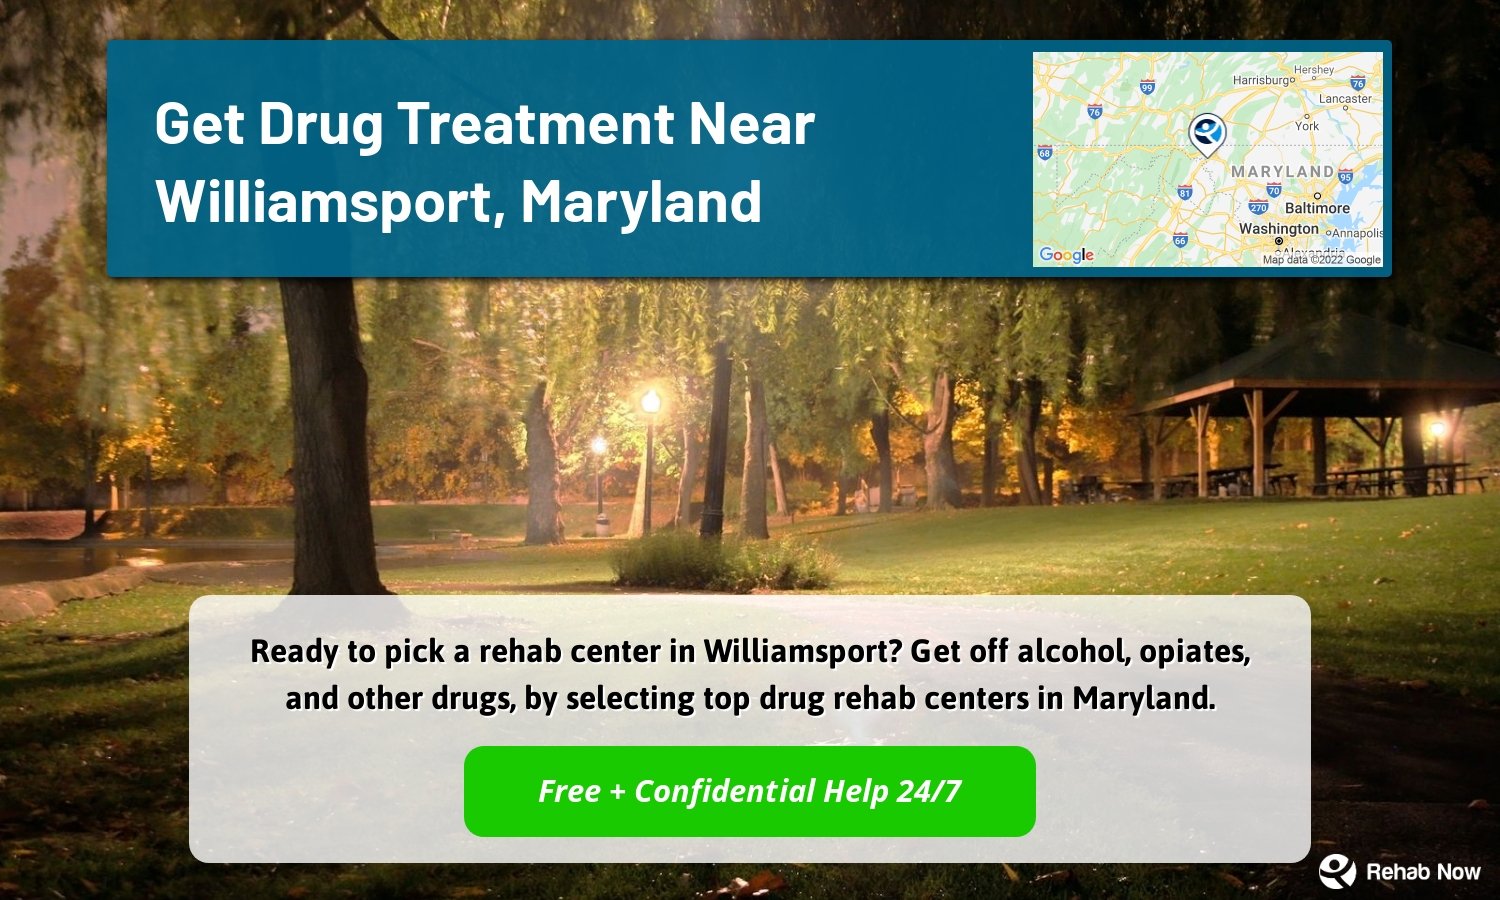 Ready to pick a rehab center in Williamsport? Get off alcohol, opiates, and other drugs, by selecting top drug rehab centers in Maryland.